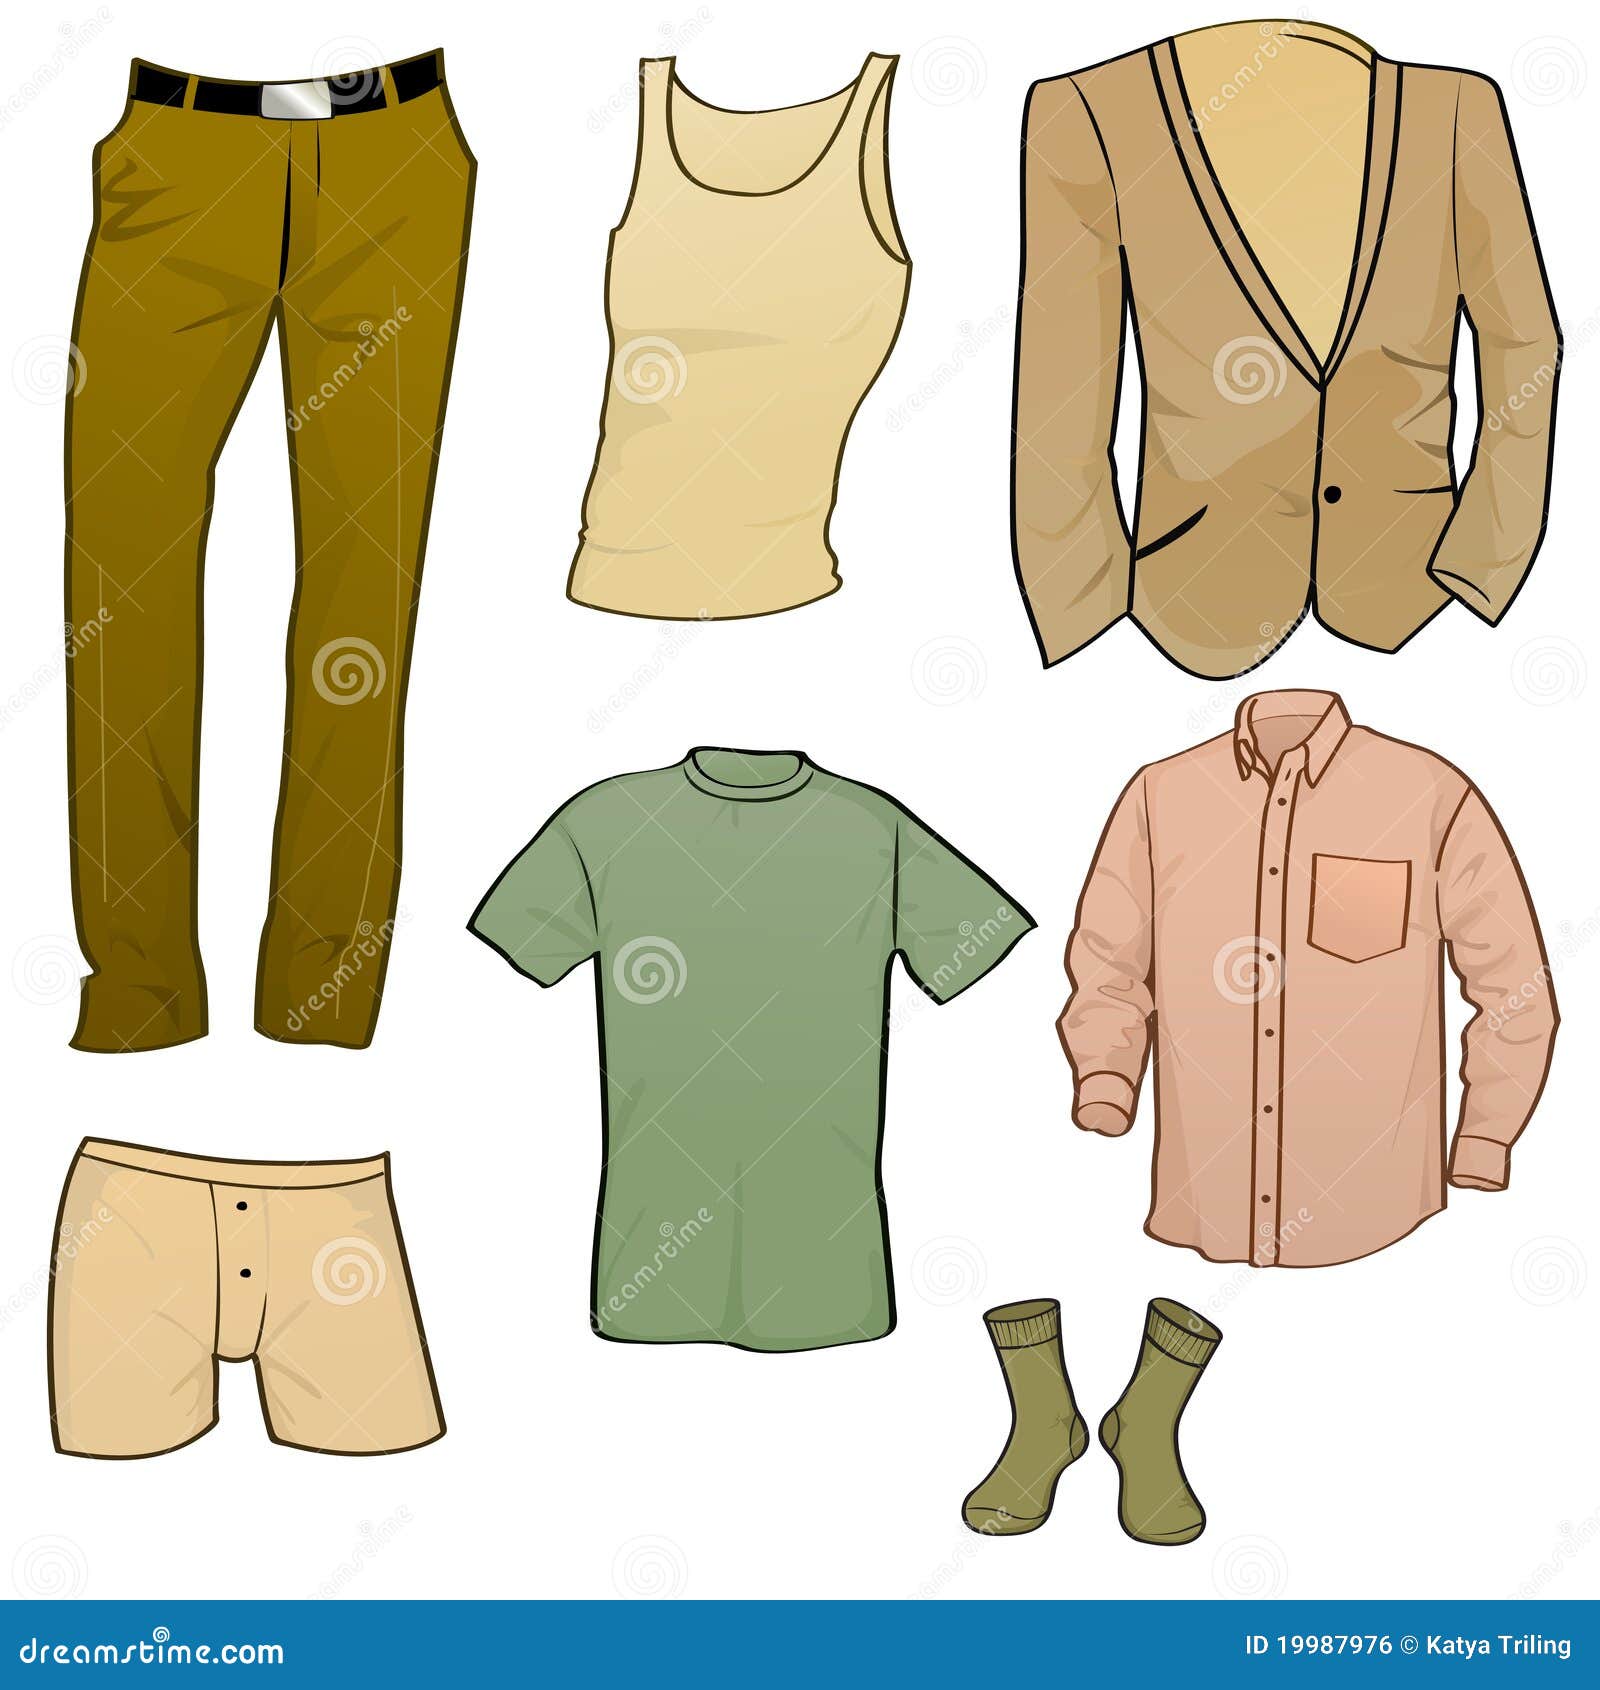 Men Clothes Icons Royalty Free Stock Image - Image: 19987976